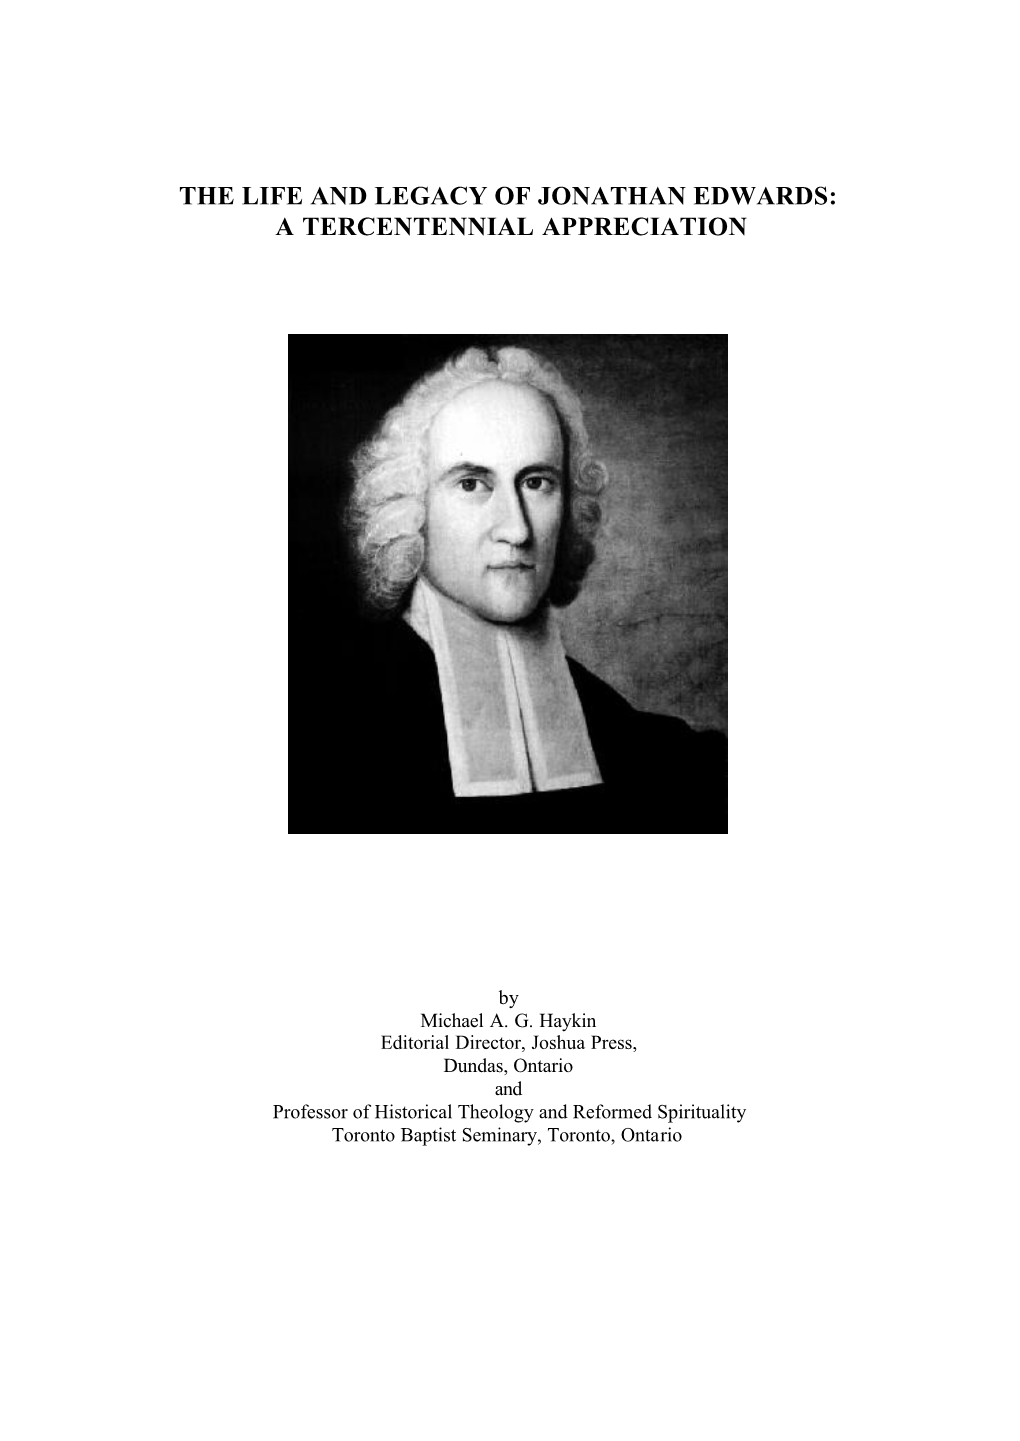 THE LIFE and LEGACY of JONATHAN EDWARDS, a Tercentennial A…